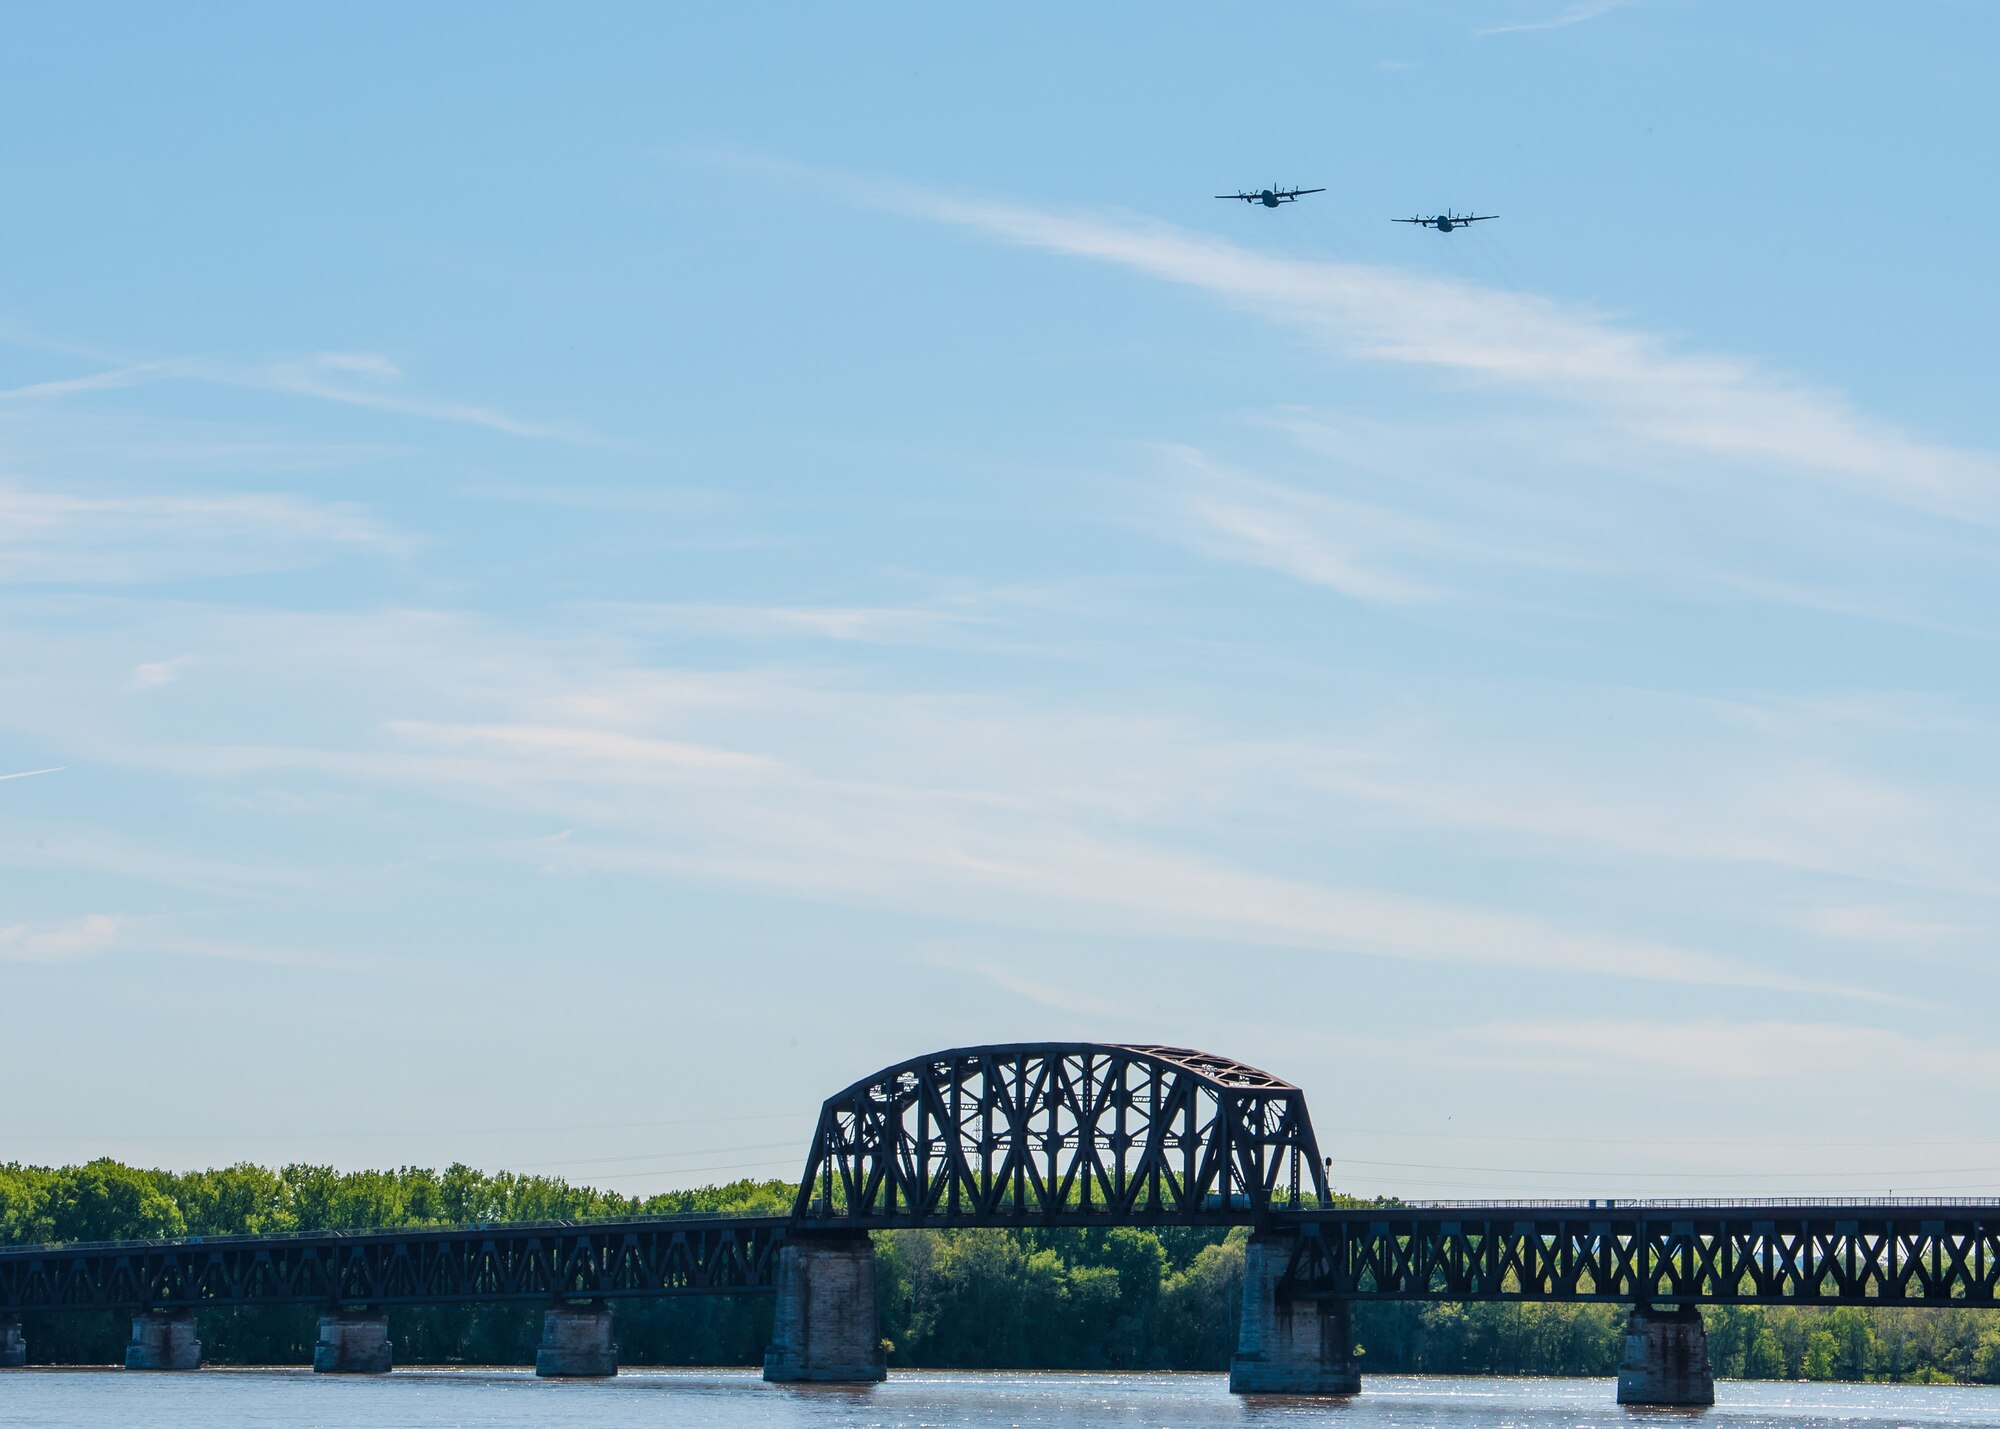 Two Kentucky Air National Guard C-130 Hercules aircraft from the 123rd Airlift Wing fly over Louisville, Ky., May 1, 2020, as part of Operation American Resolve, a nationwide salute to all those supporting COVID-19 response efforts. The operation is intended to lift morale during a time of severe health and economic impacts that have resulted from COVID-19. (U.S. Air National Guard photo by Senior Airman Chloe Ochs)